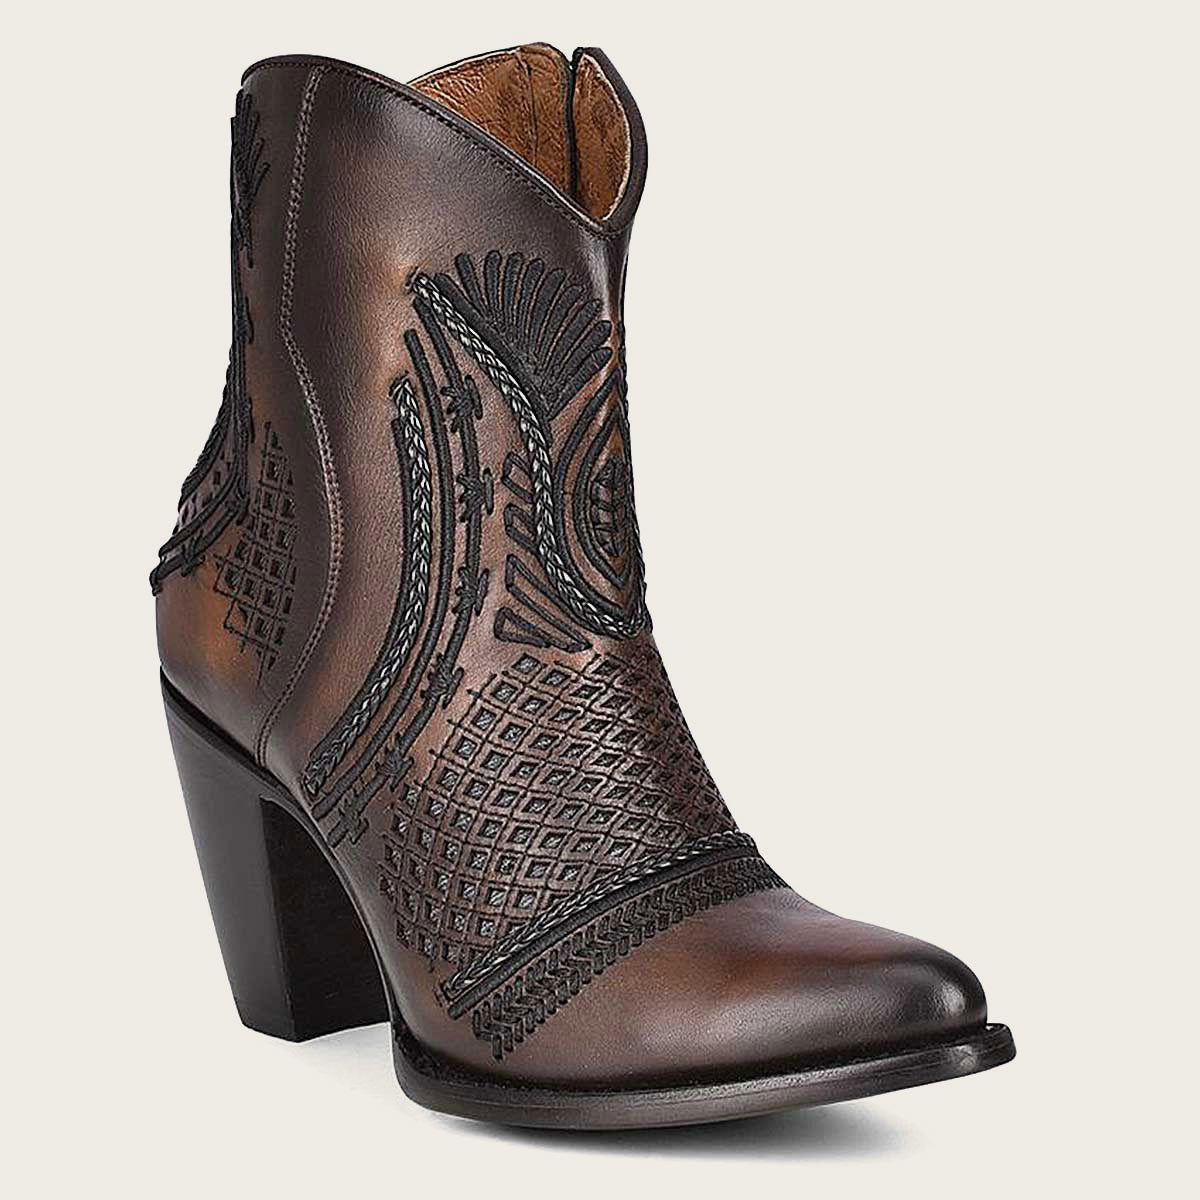 artisan brown leather booties. Perfect for both casual and formal occasions, they're sure to make a statement wherever you go